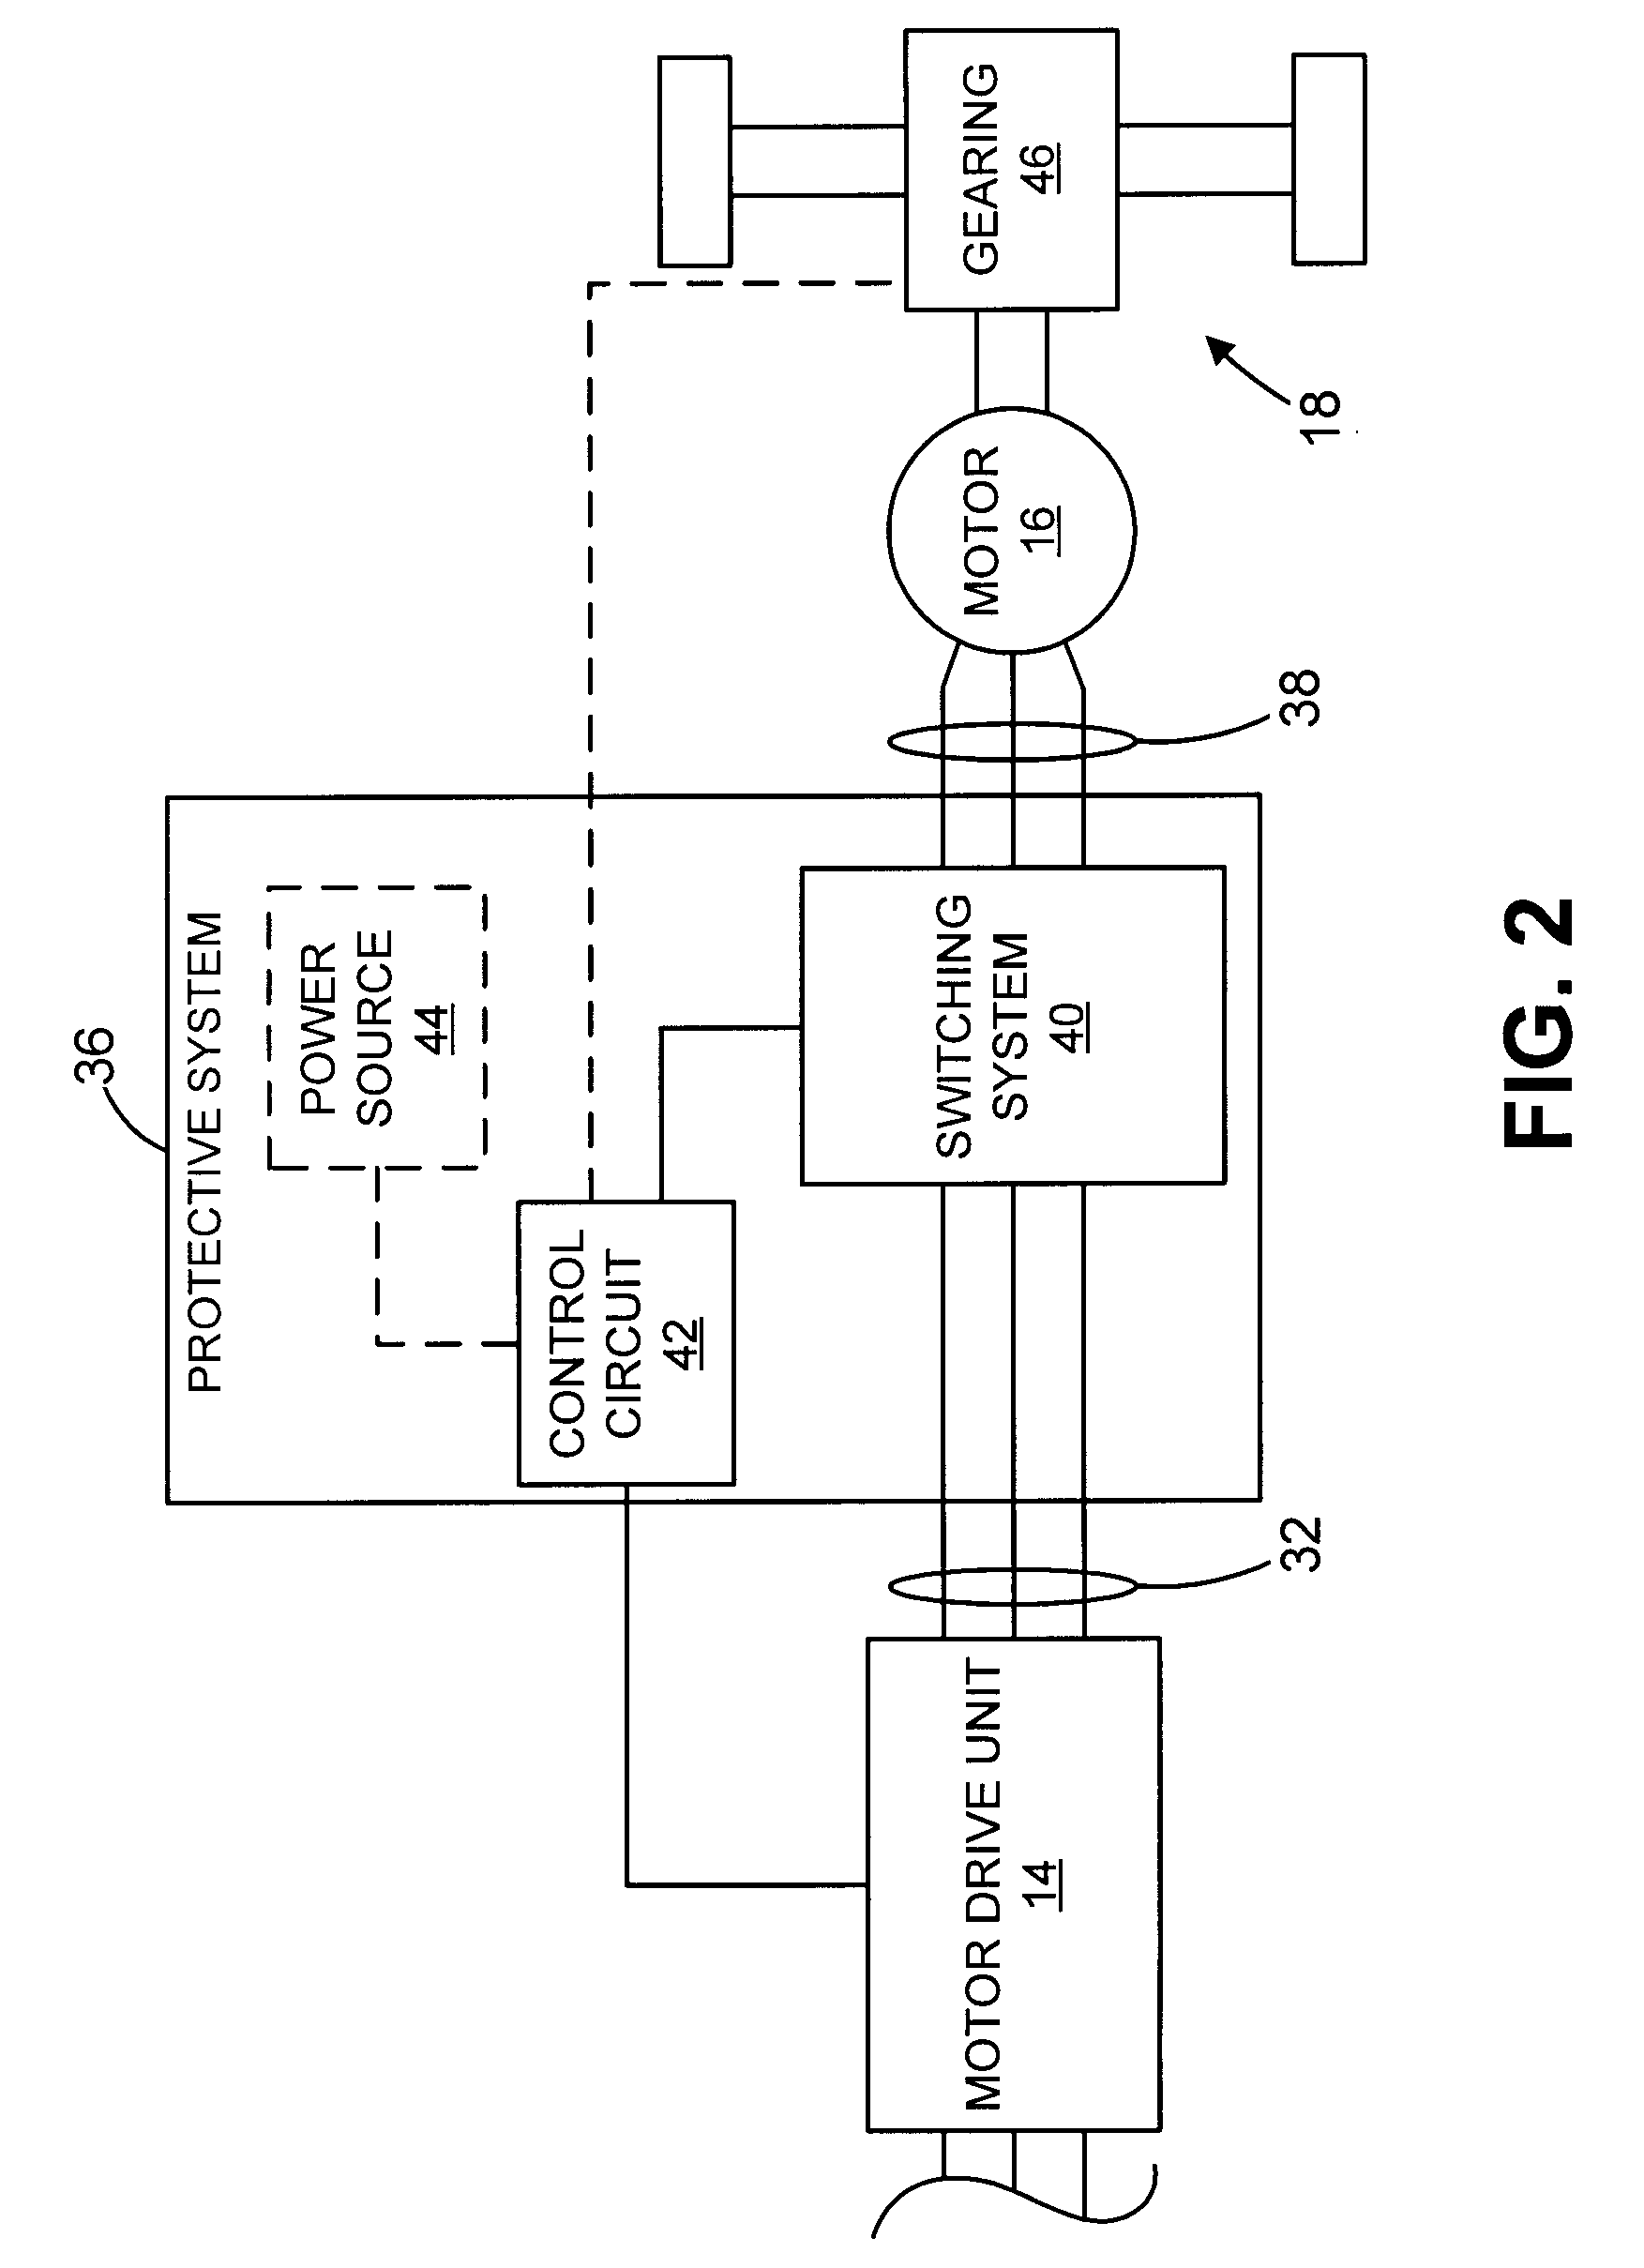 System and method for protecting a motor drive unit from motor back EMF under fault conditions